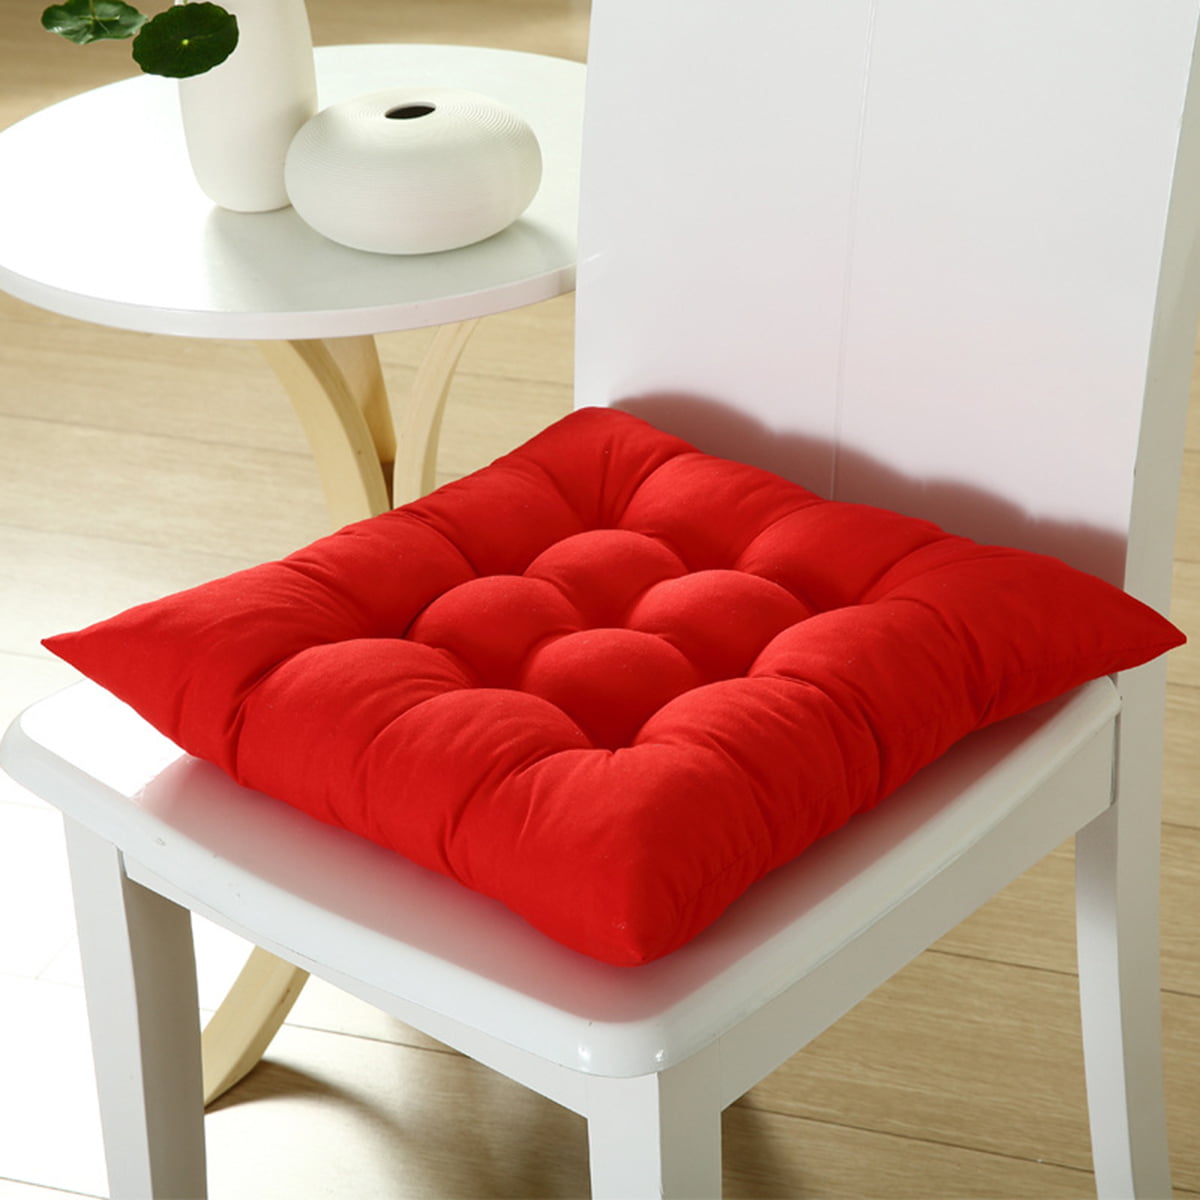 Chair Pads,Soft Square Cotton Chair Pad Seat Cushion with Ties Comfy